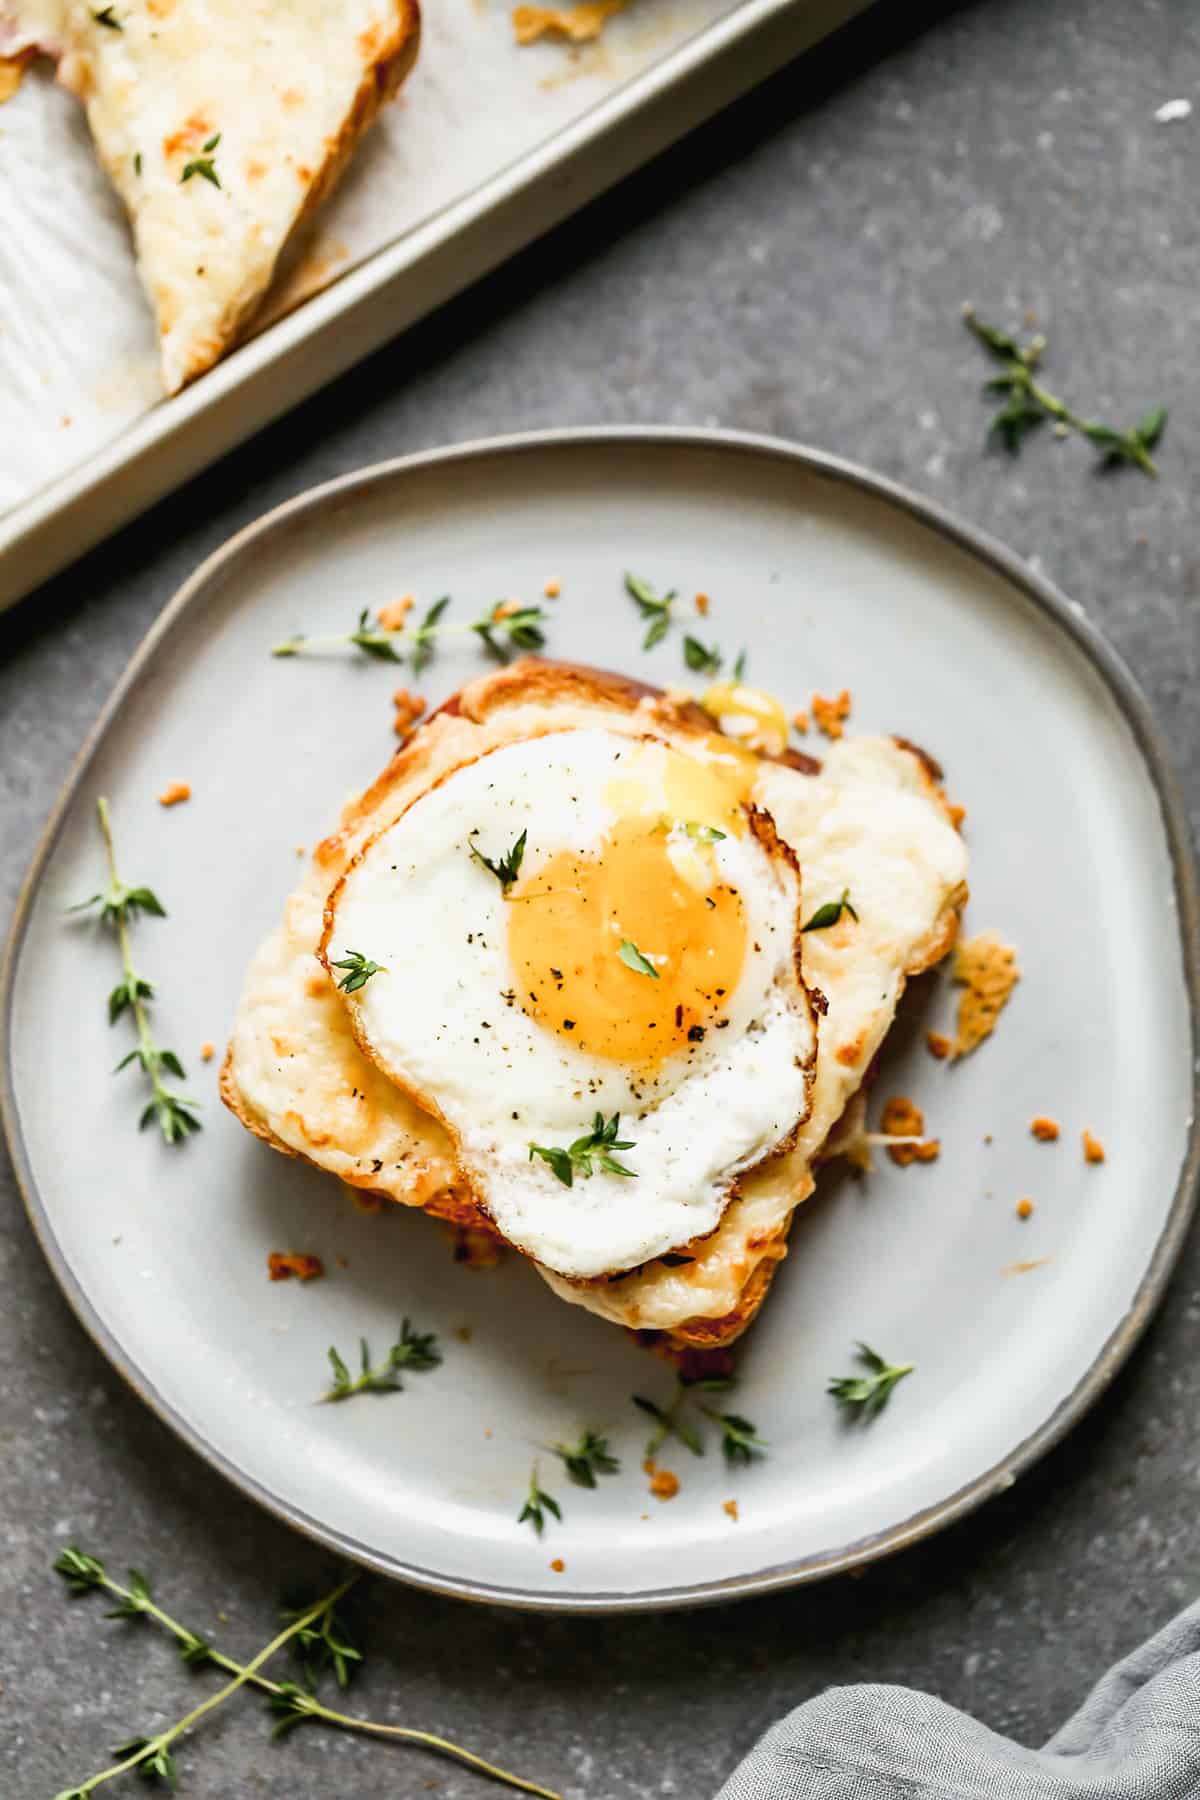 A French Croque Madame sandwich on a plate, topped with an egg.